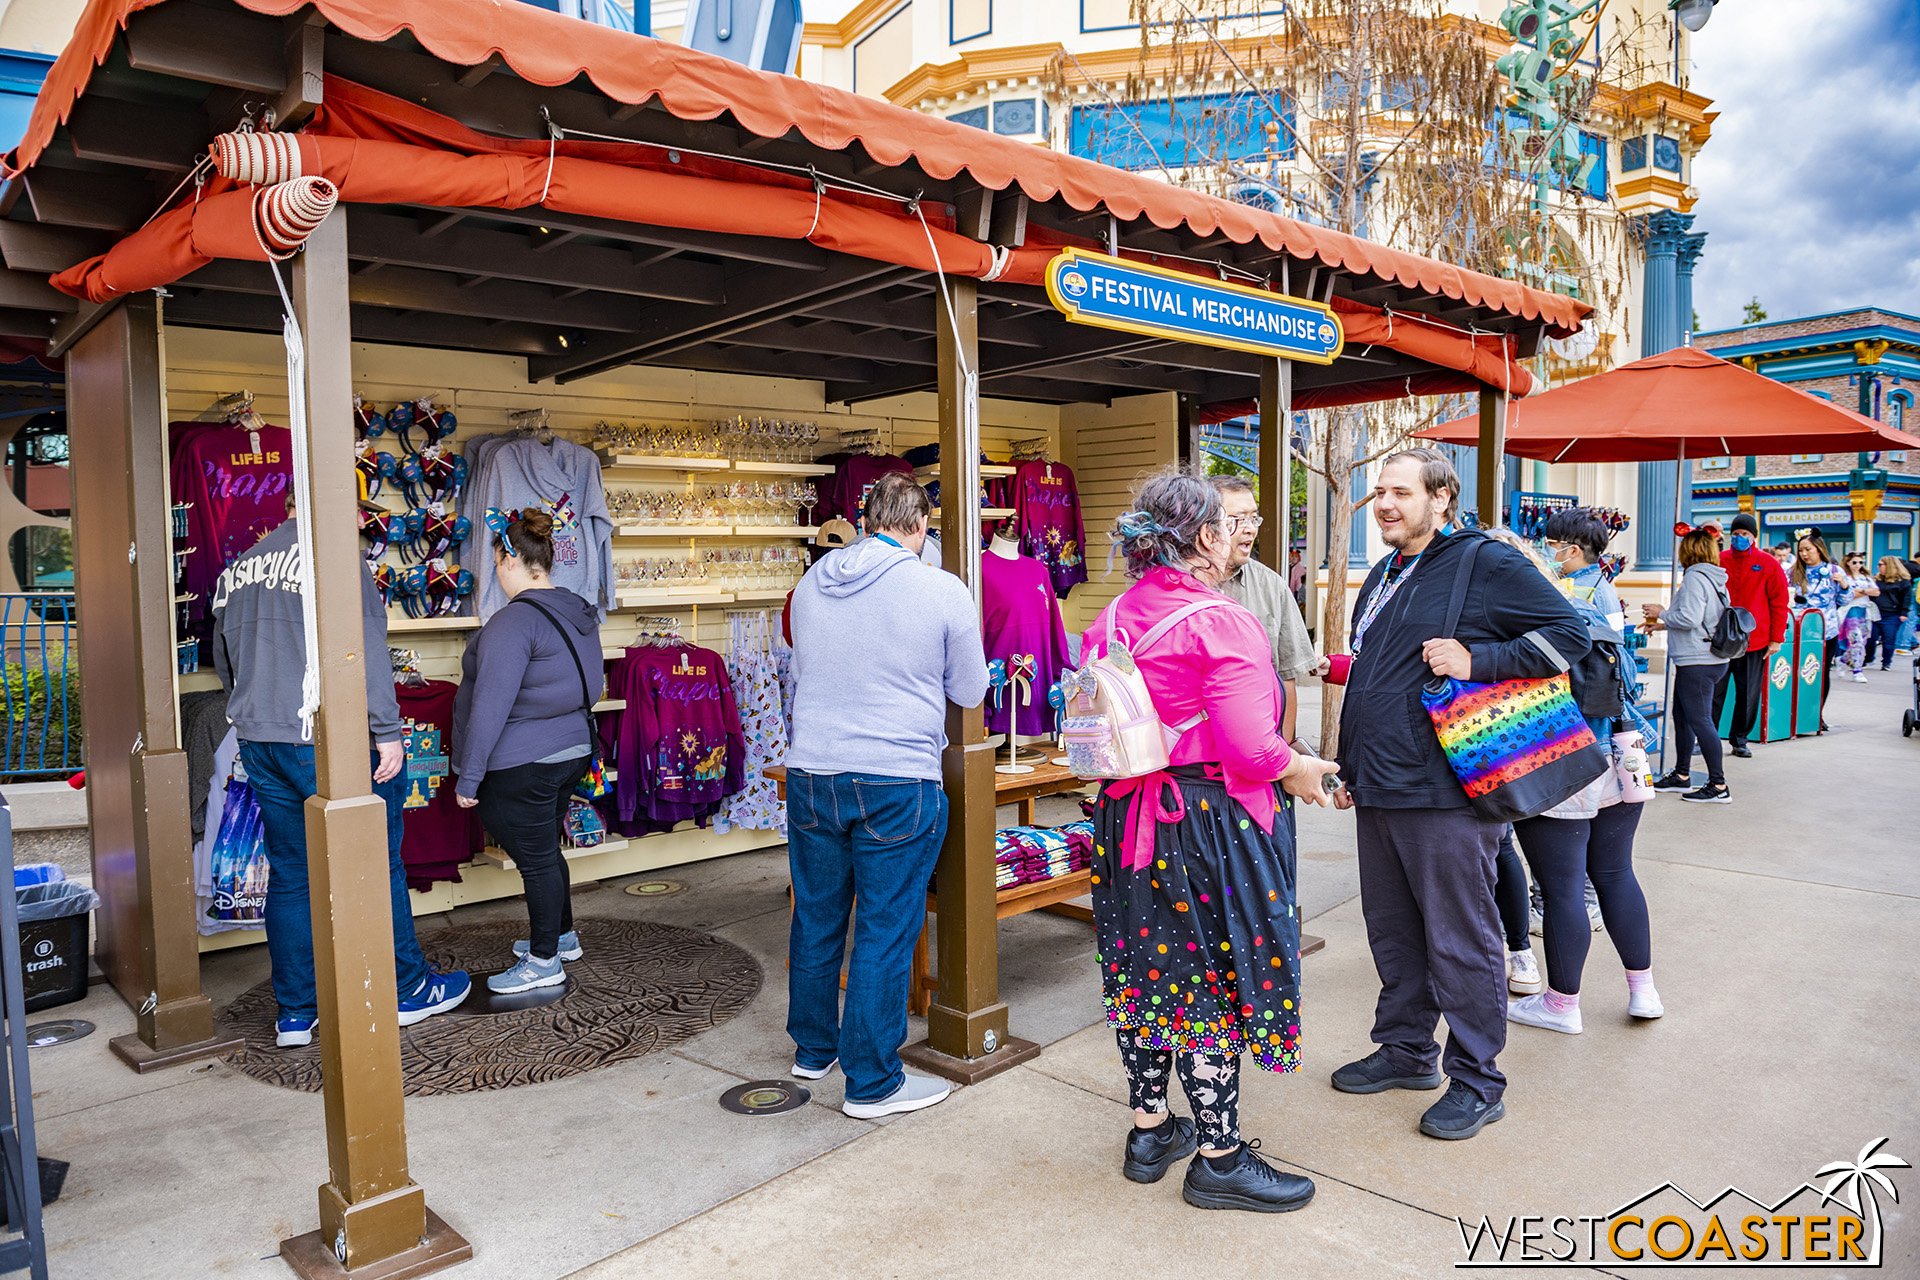  The main souvenir stand is still located outside the entrance to The Little Mermaid: Ariel’s Undersea Adventure attraction. 